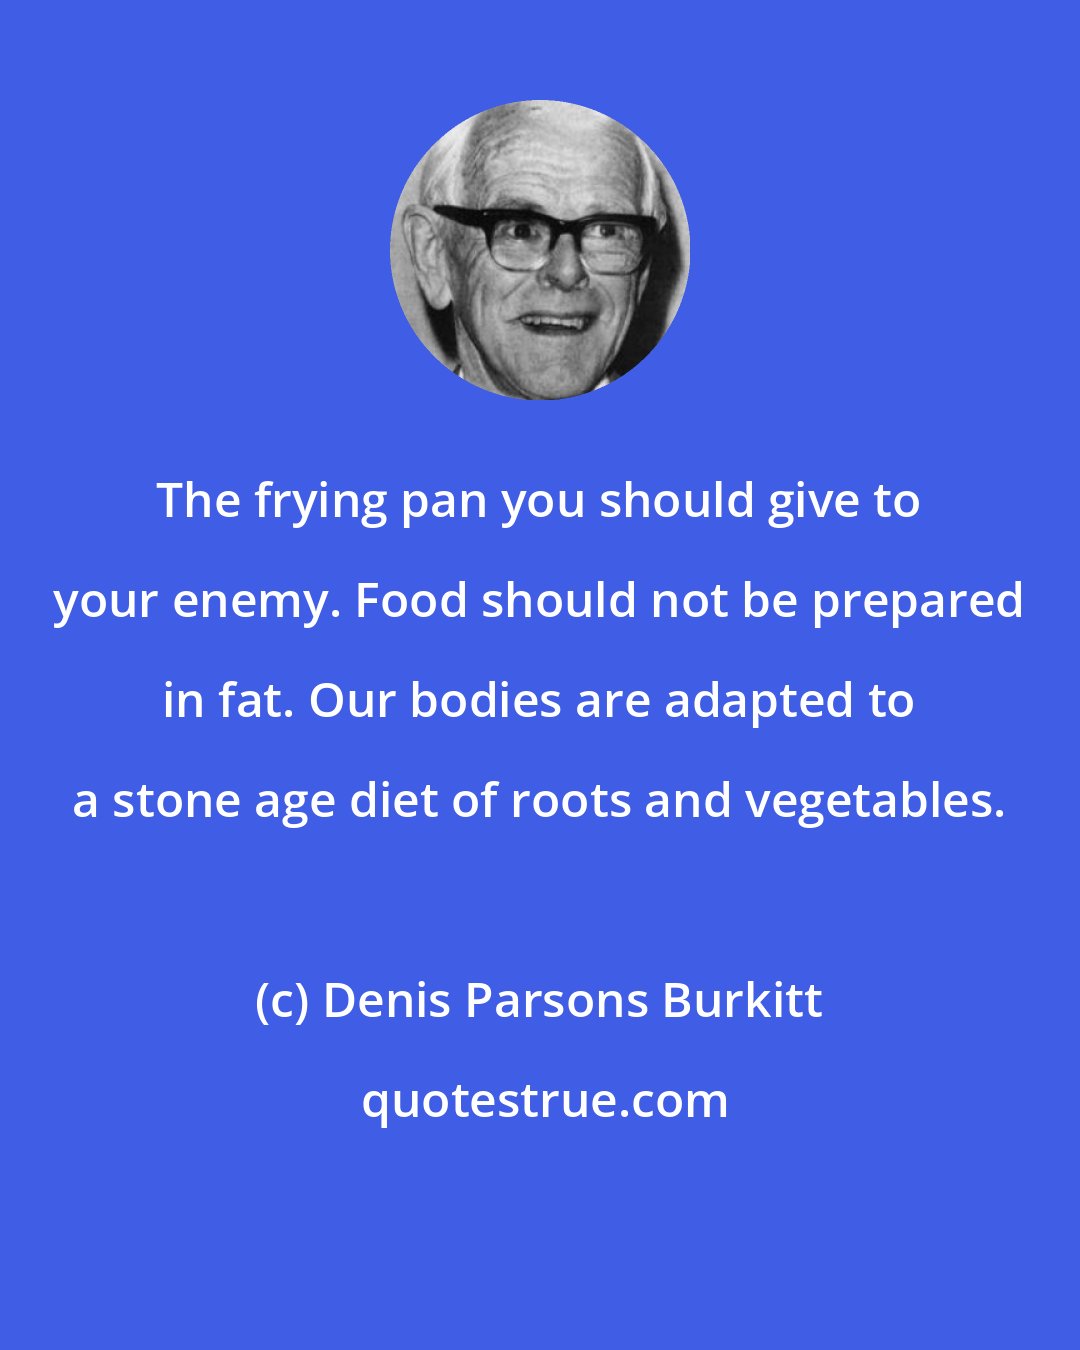 Denis Parsons Burkitt: The frying pan you should give to your enemy. Food should not be prepared in fat. Our bodies are adapted to a stone age diet of roots and vegetables.